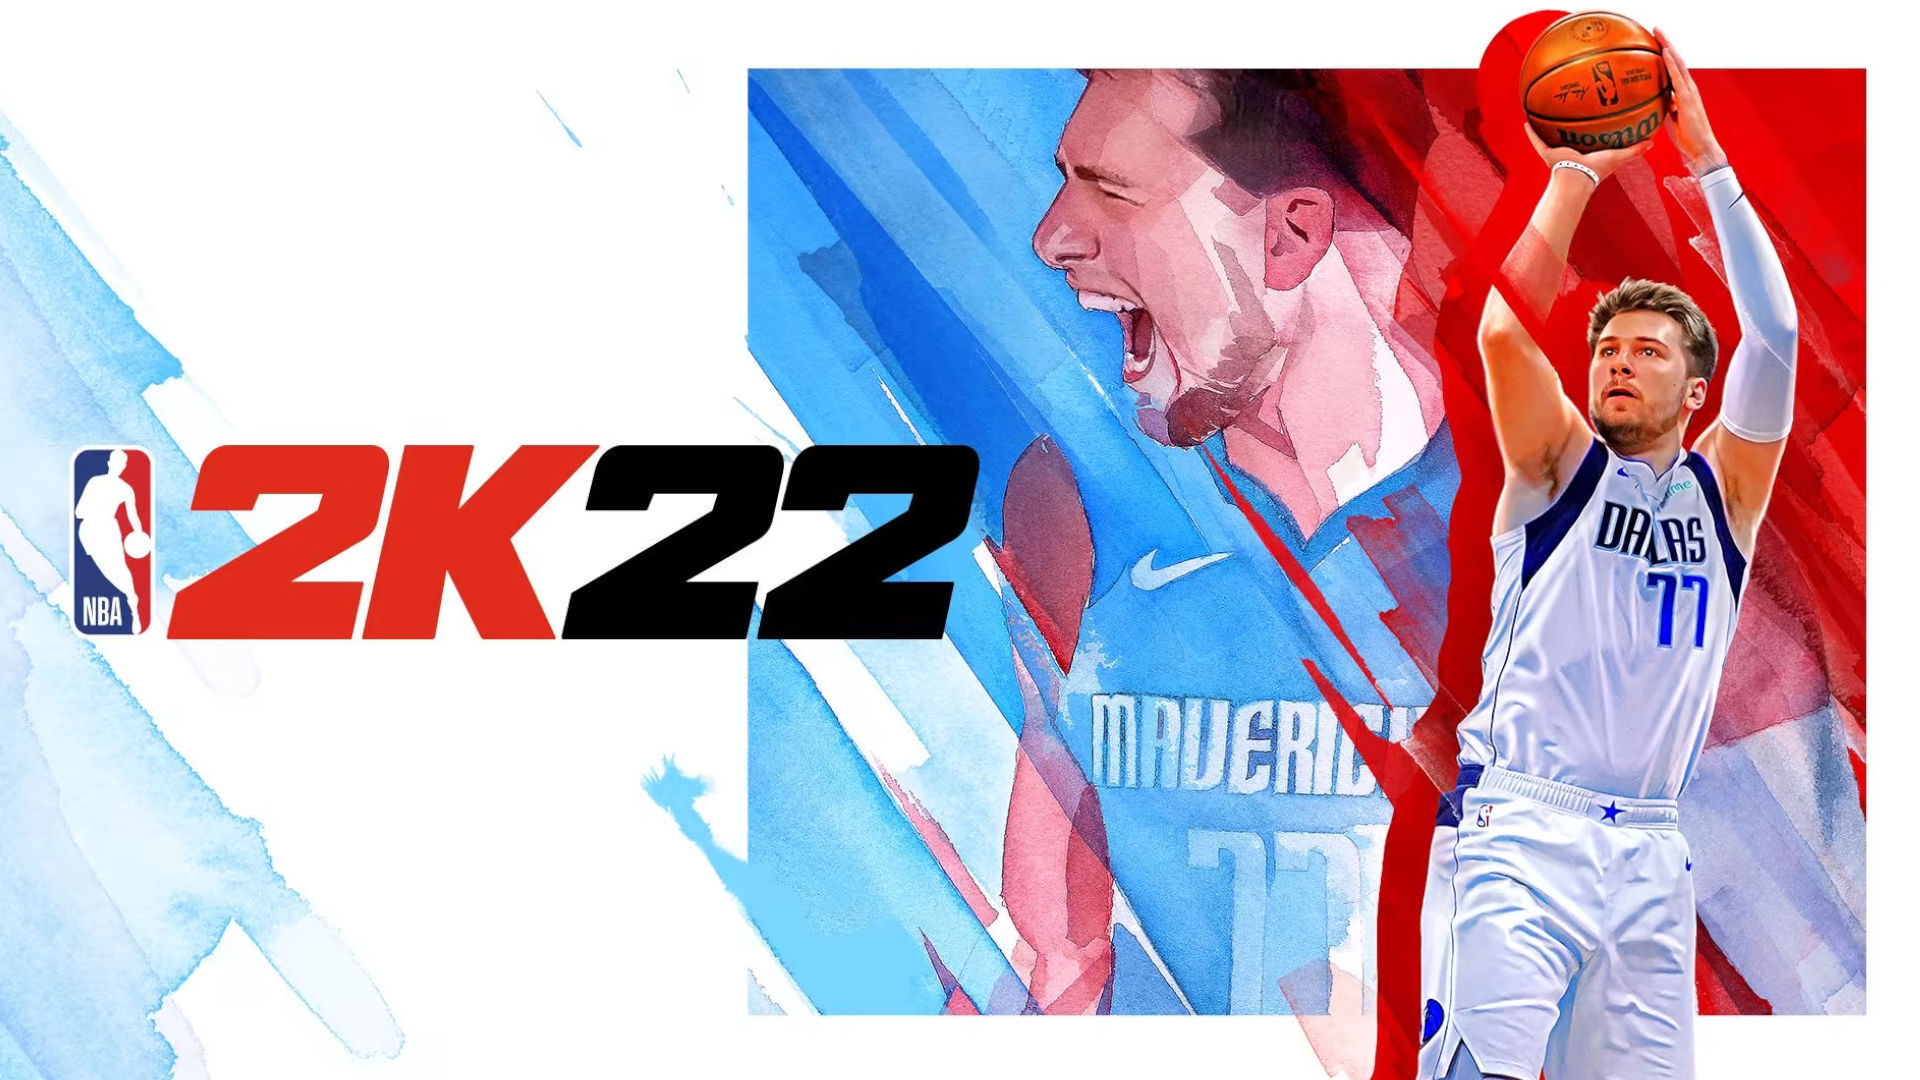 Cover art for NBA 2K22, one of the flagship switch basketball games